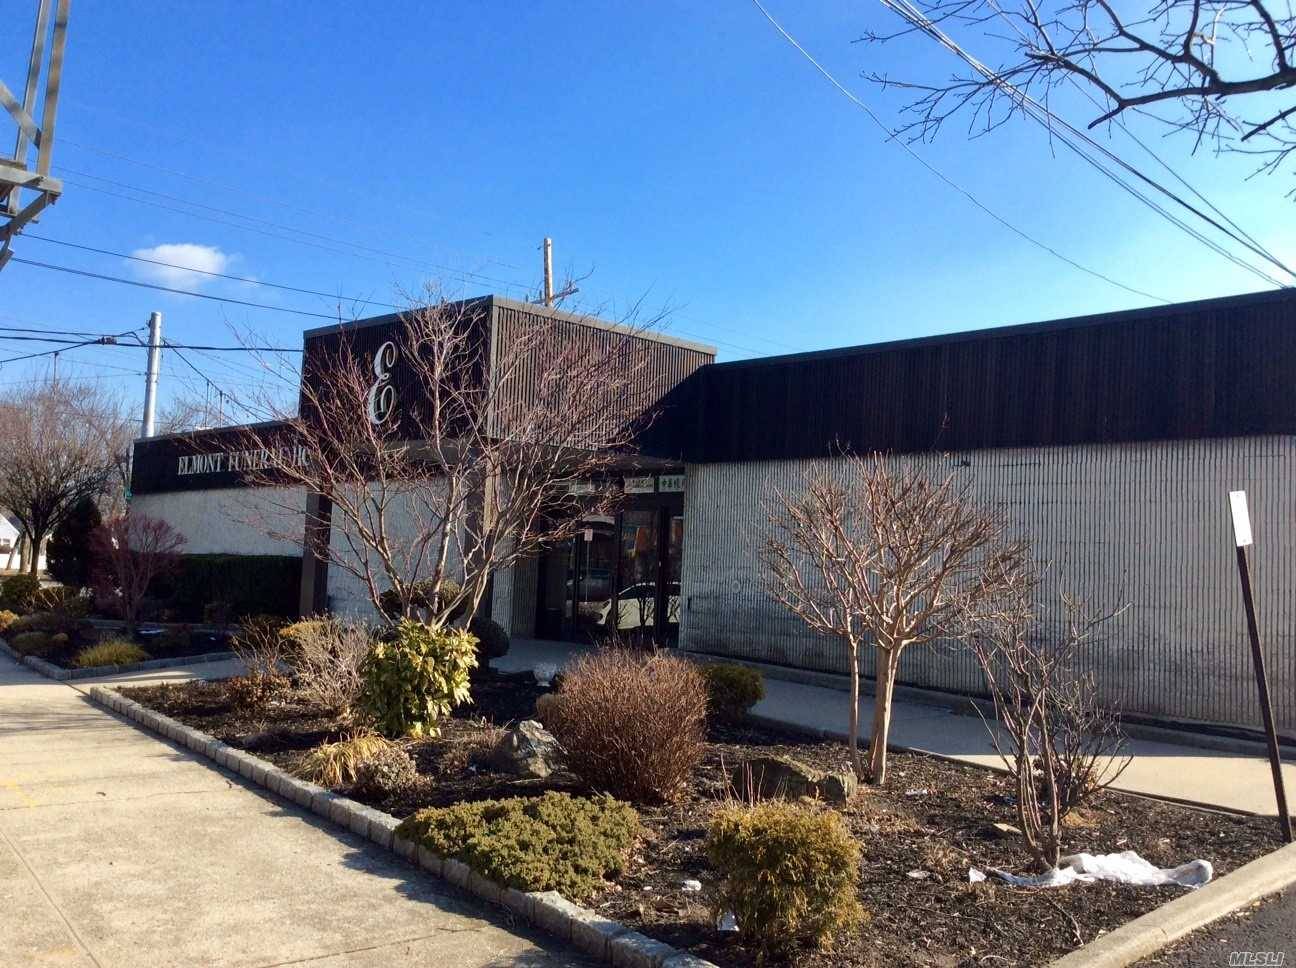 Three Building for sale 1529, 771A and 771B, parking lot 28 spots plus street, Interior 10, 400 sq ft Far Rights, NY Islanders moving to Elmont, good for restaurant, fast ...